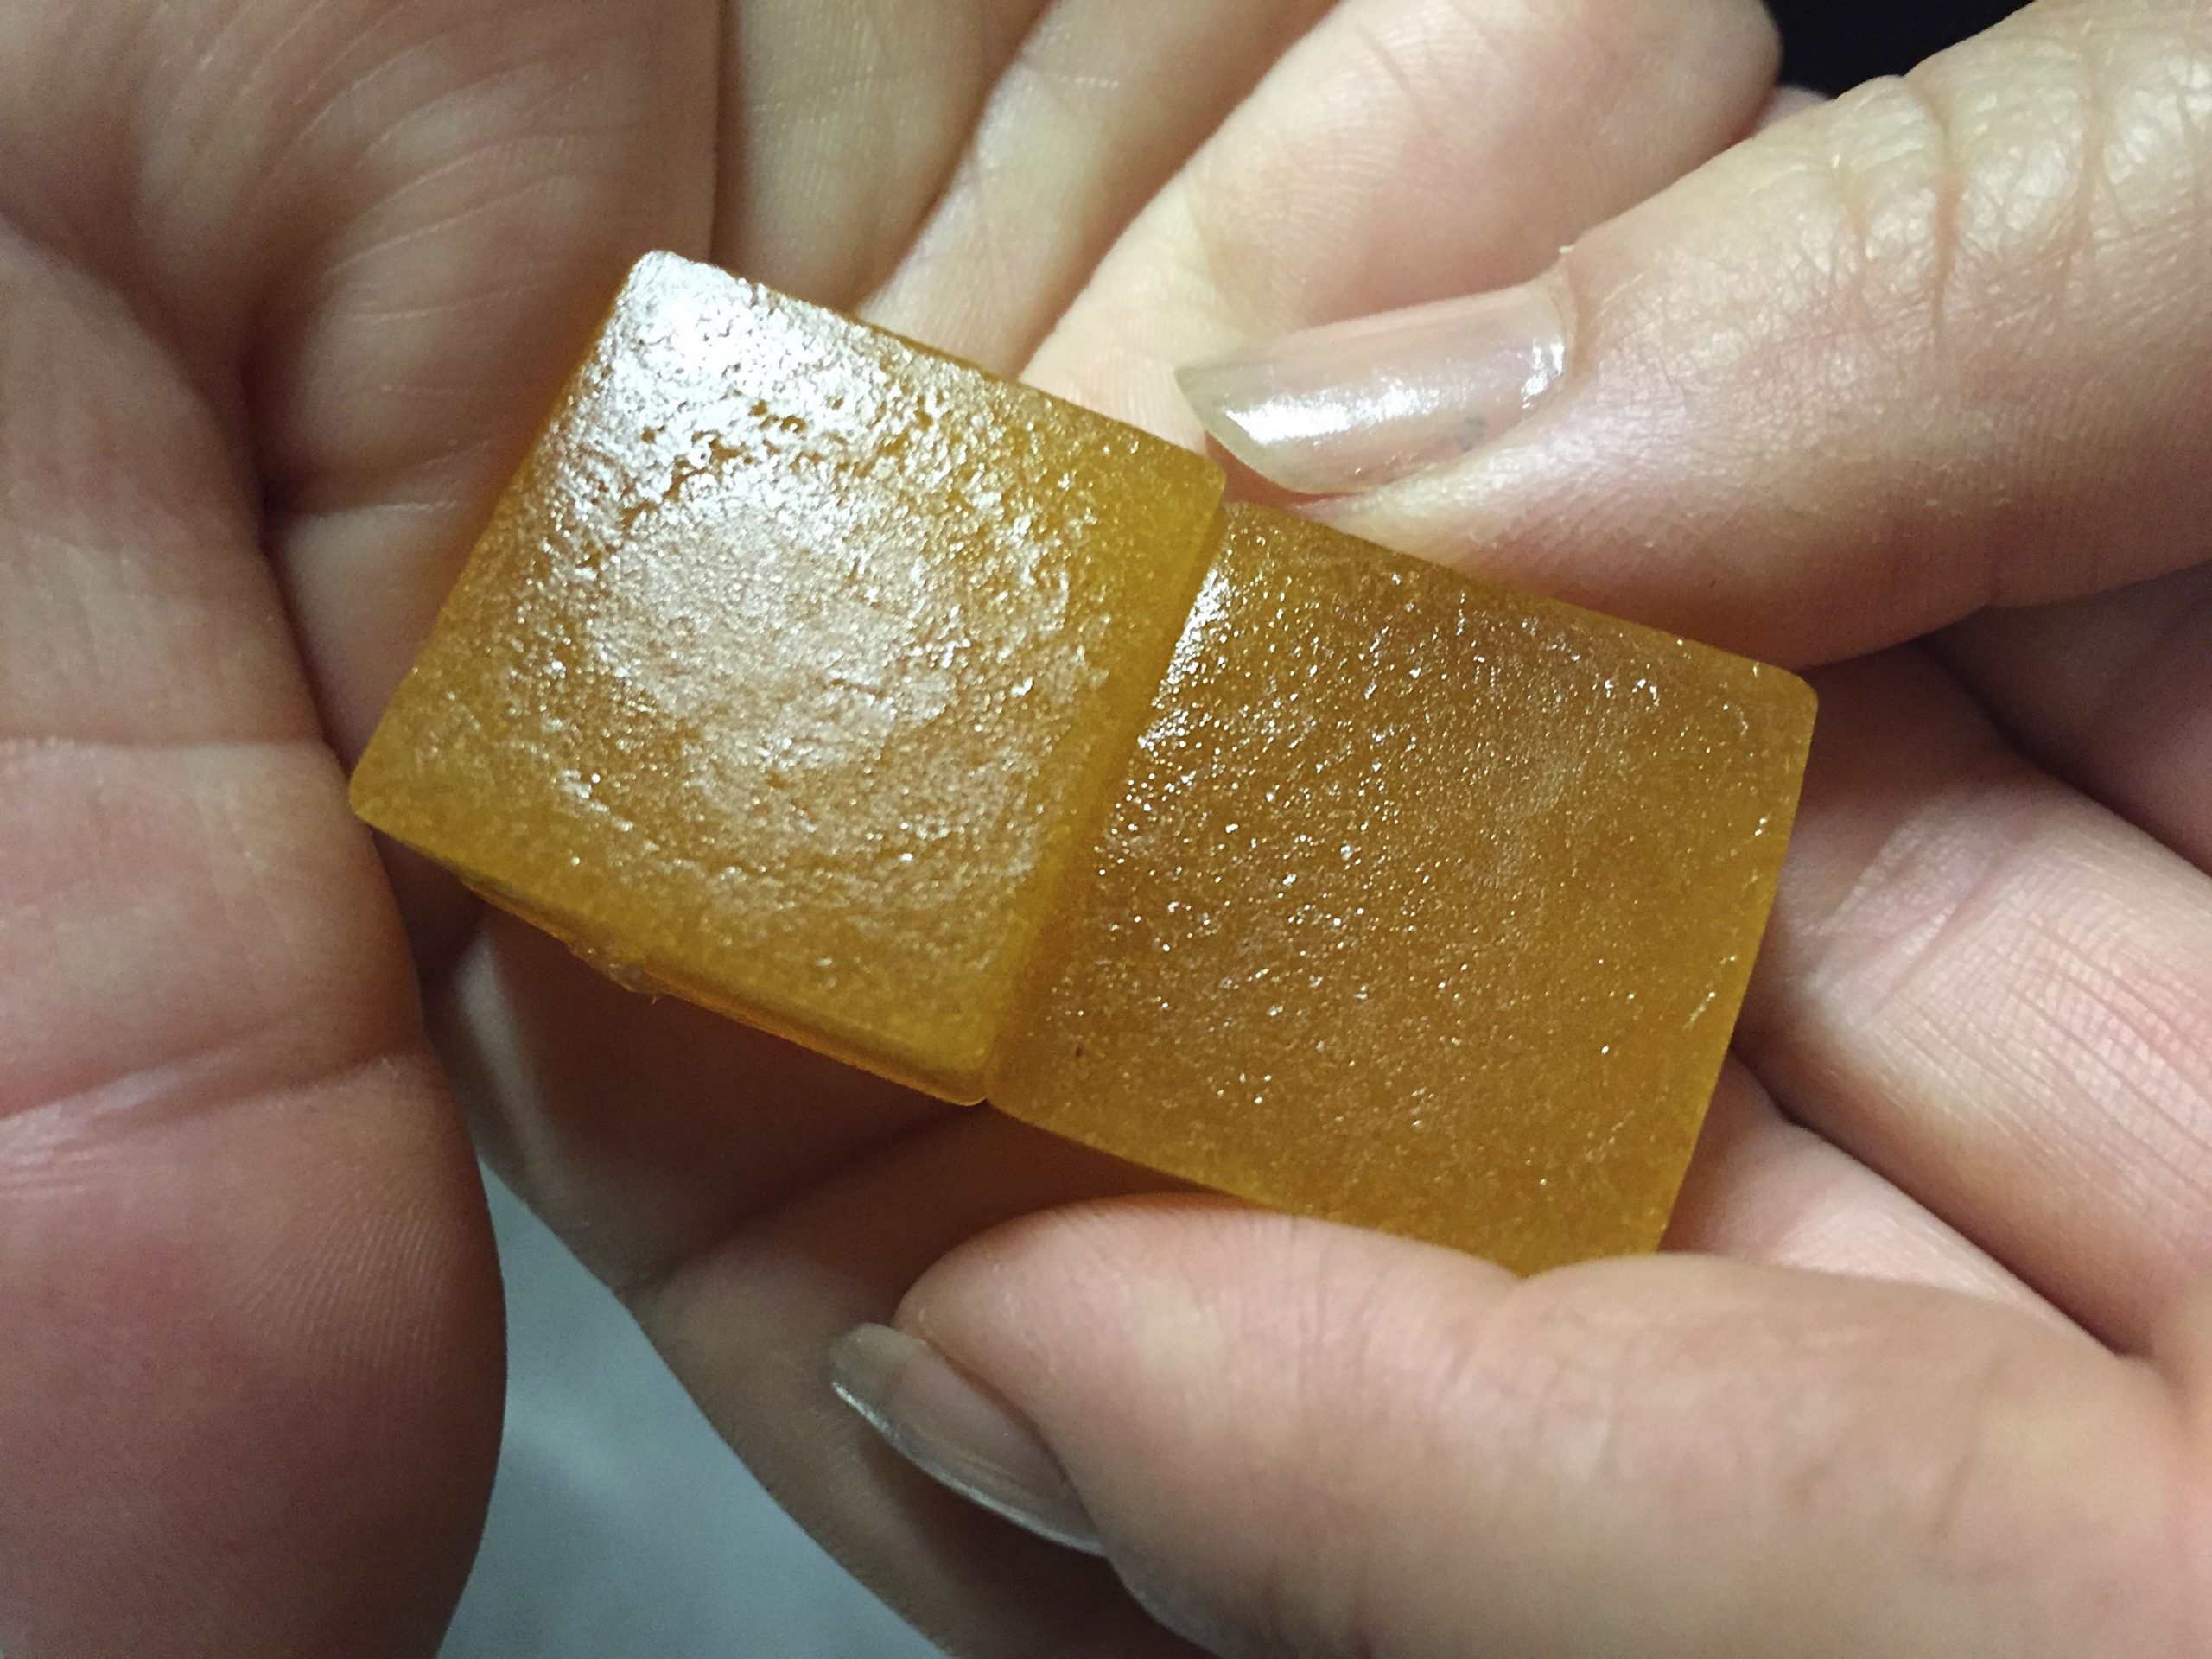 What are the advantages of THC gummies over other cannabis products?